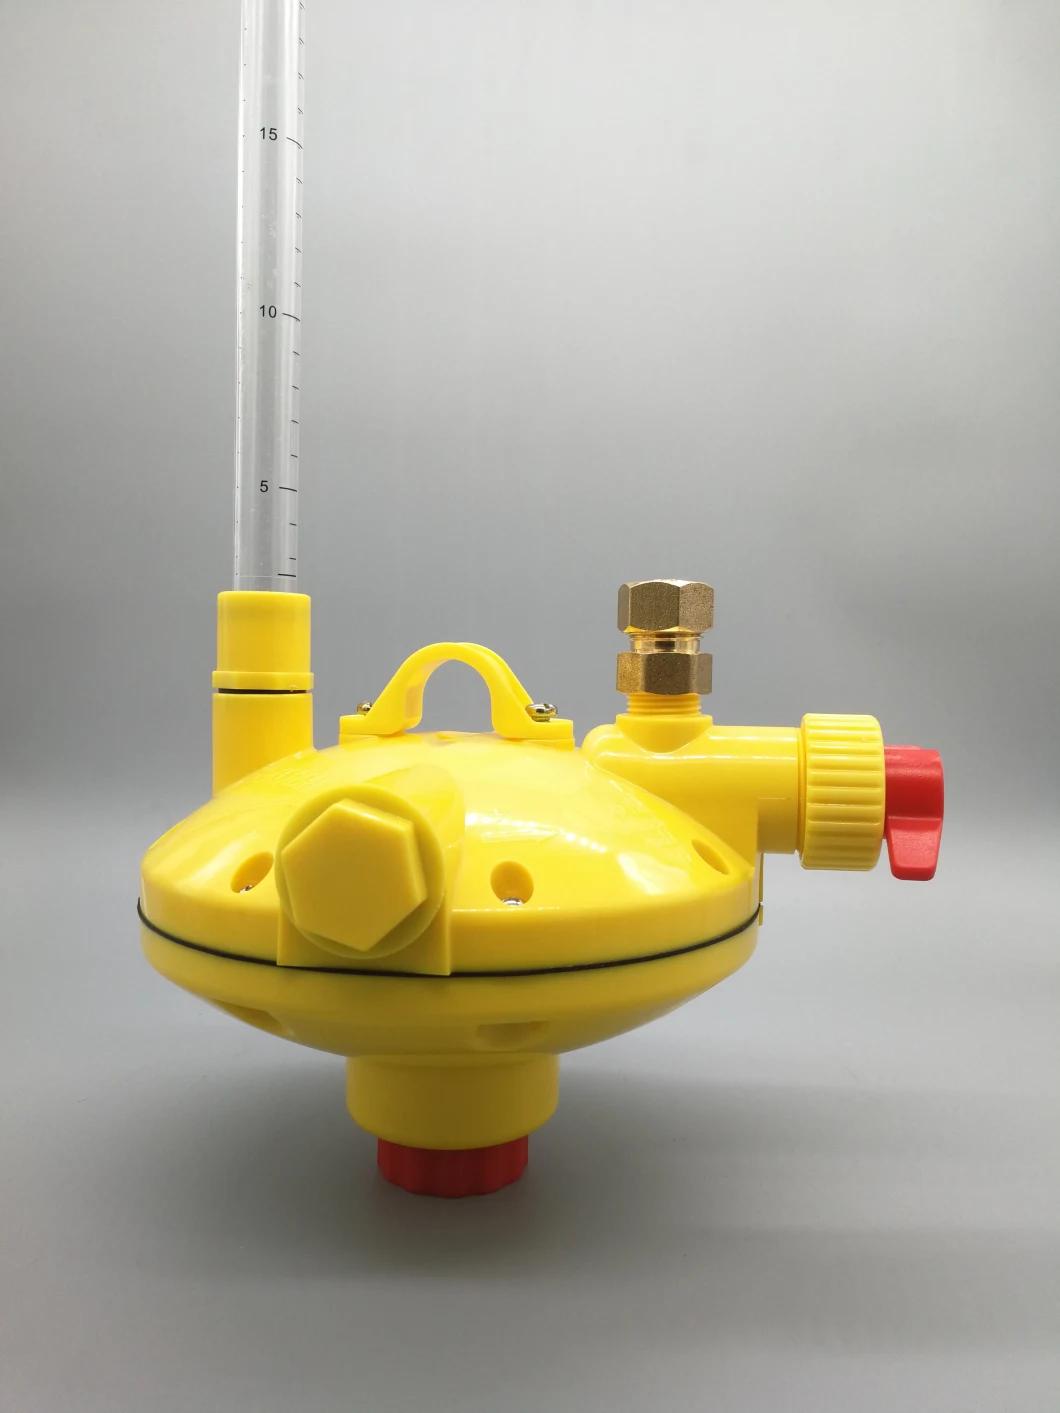 Water Pressure Regulator for Poultry Equipment Watering System